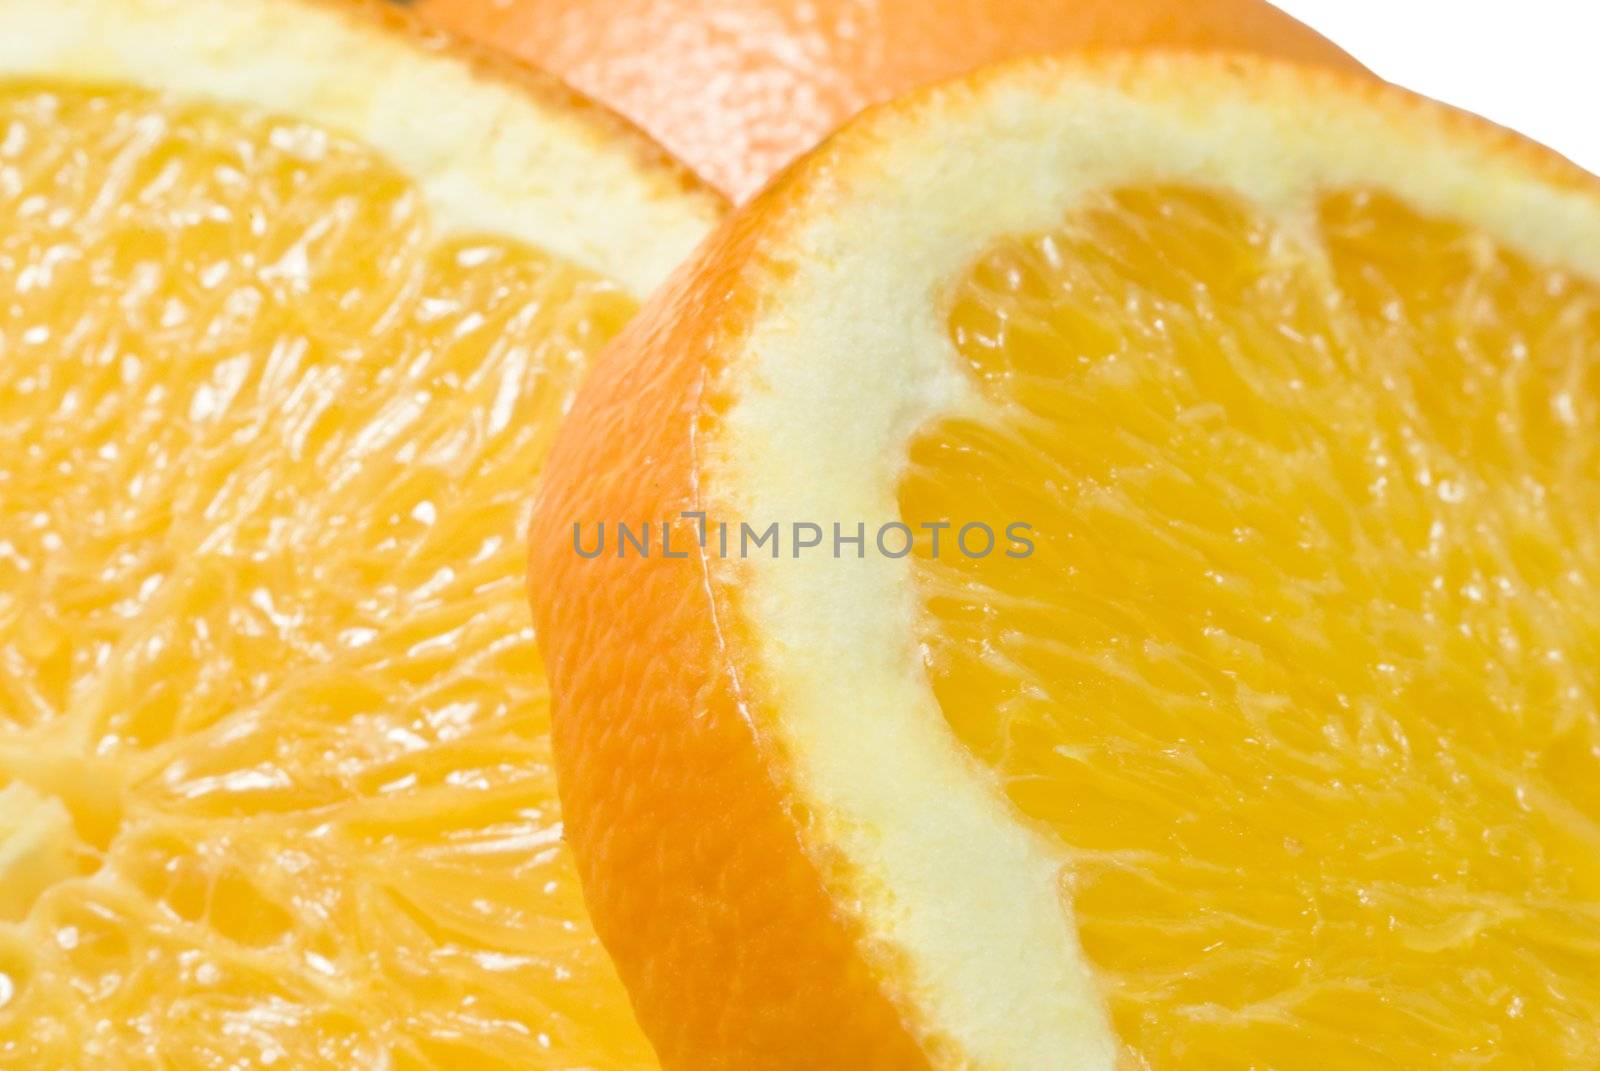 Close up (macro) of two slices of orange (foreground) and an upturned half-orange (middle-ground) with white background.